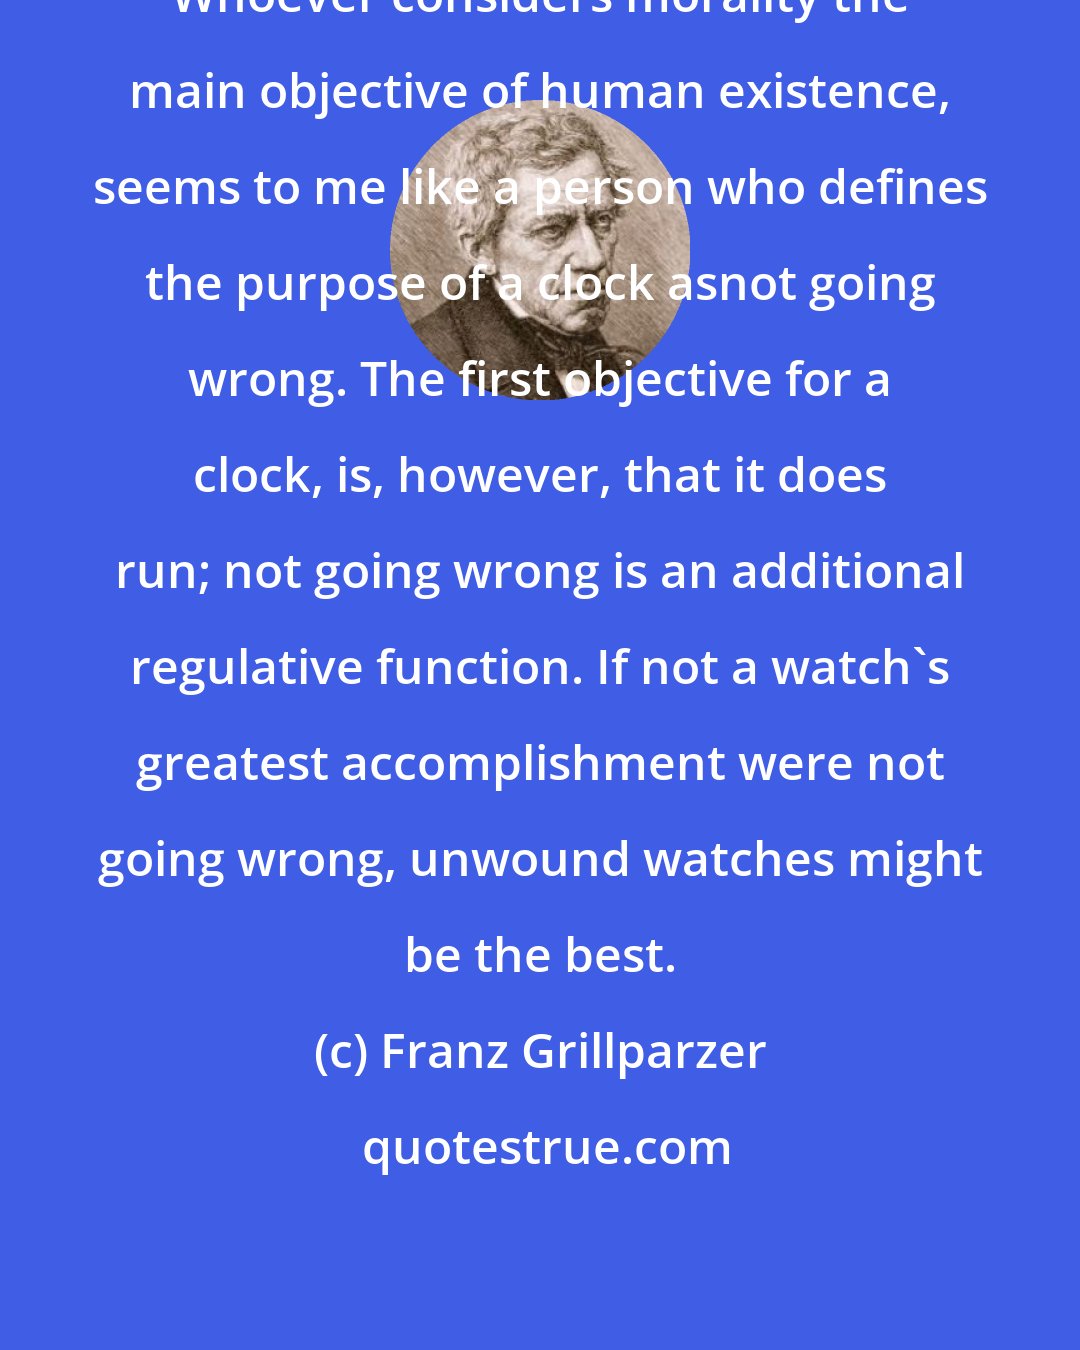 Franz Grillparzer: Whoever considers morality the main objective of human existence, seems to me like a person who defines the purpose of a clock asnot going wrong. The first objective for a clock, is, however, that it does run; not going wrong is an additional regulative function. If not a watch's greatest accomplishment were not going wrong, unwound watches might be the best.